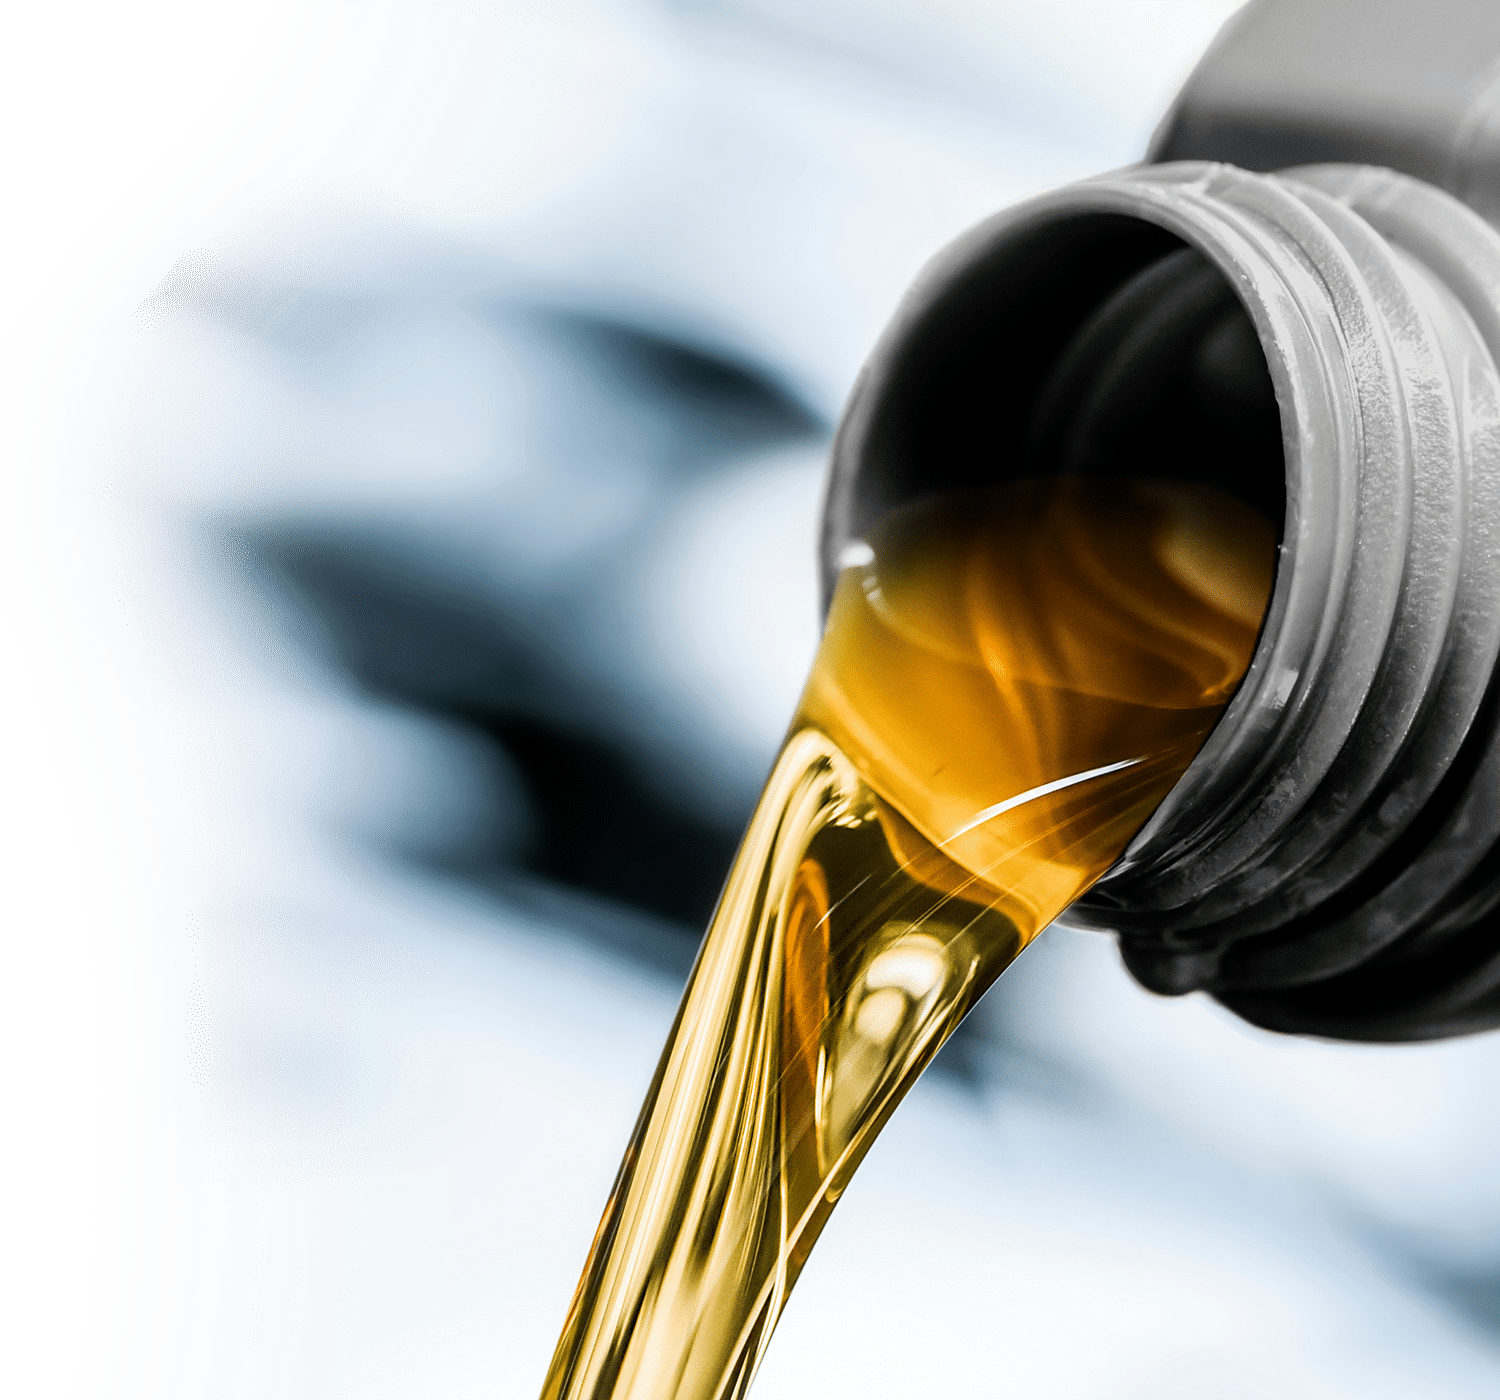 State-of-the art, friction modified and optimized Engine Oils